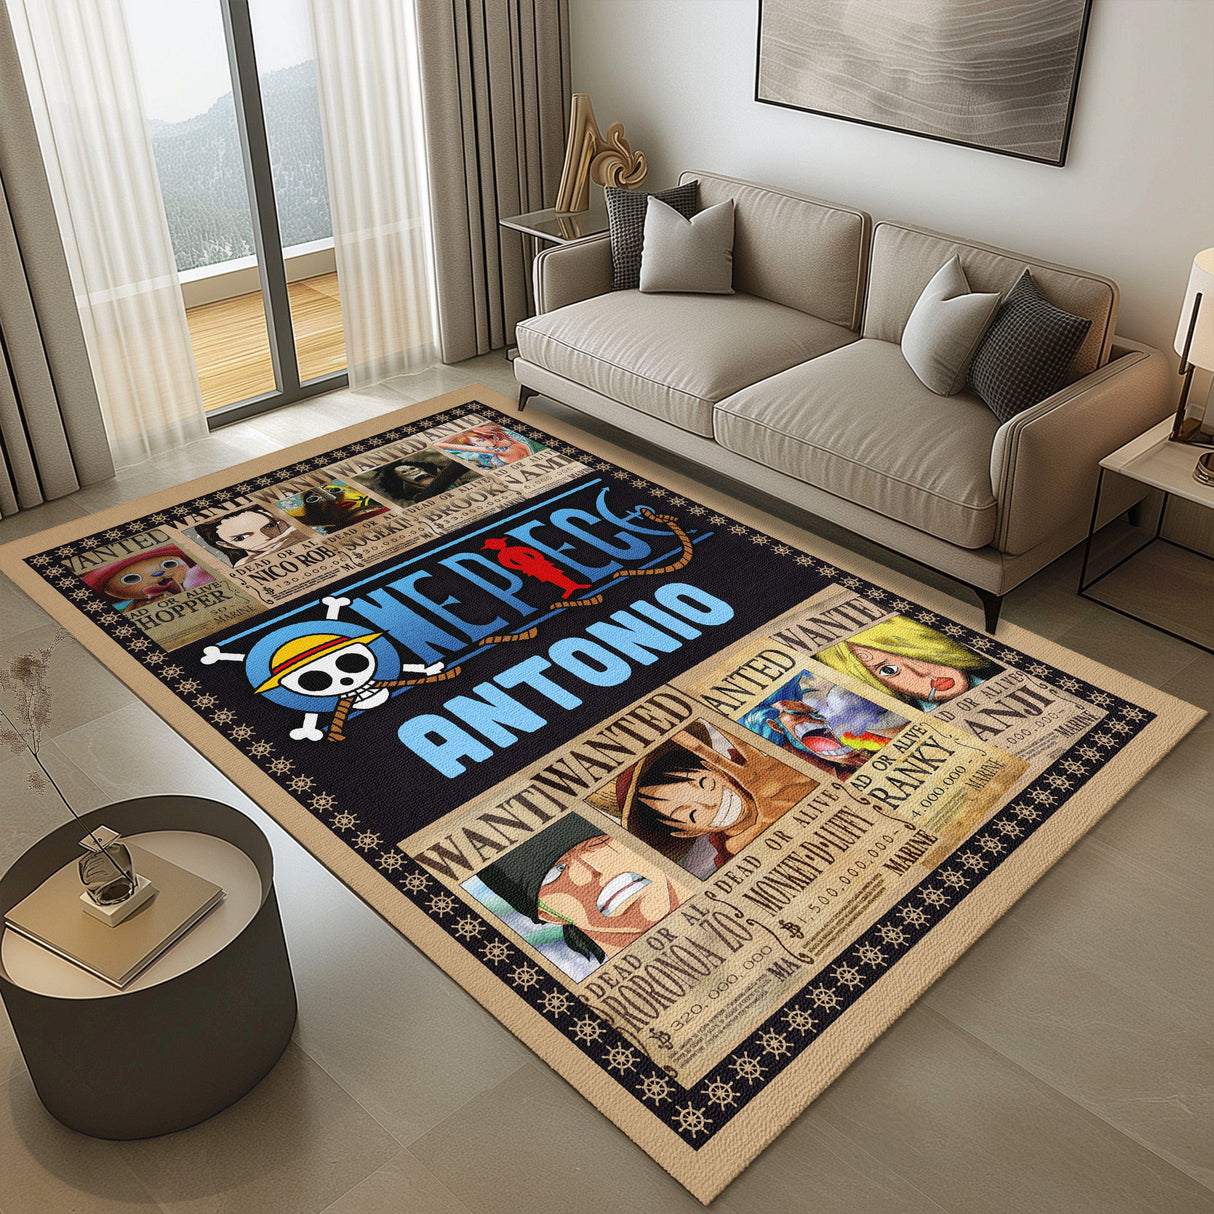 Mats & Rugs Copy of Wanted Paper Pirate Squad One Piece Rugs | Pirate Squad One Piece WantedThin Area Rug , Floormat